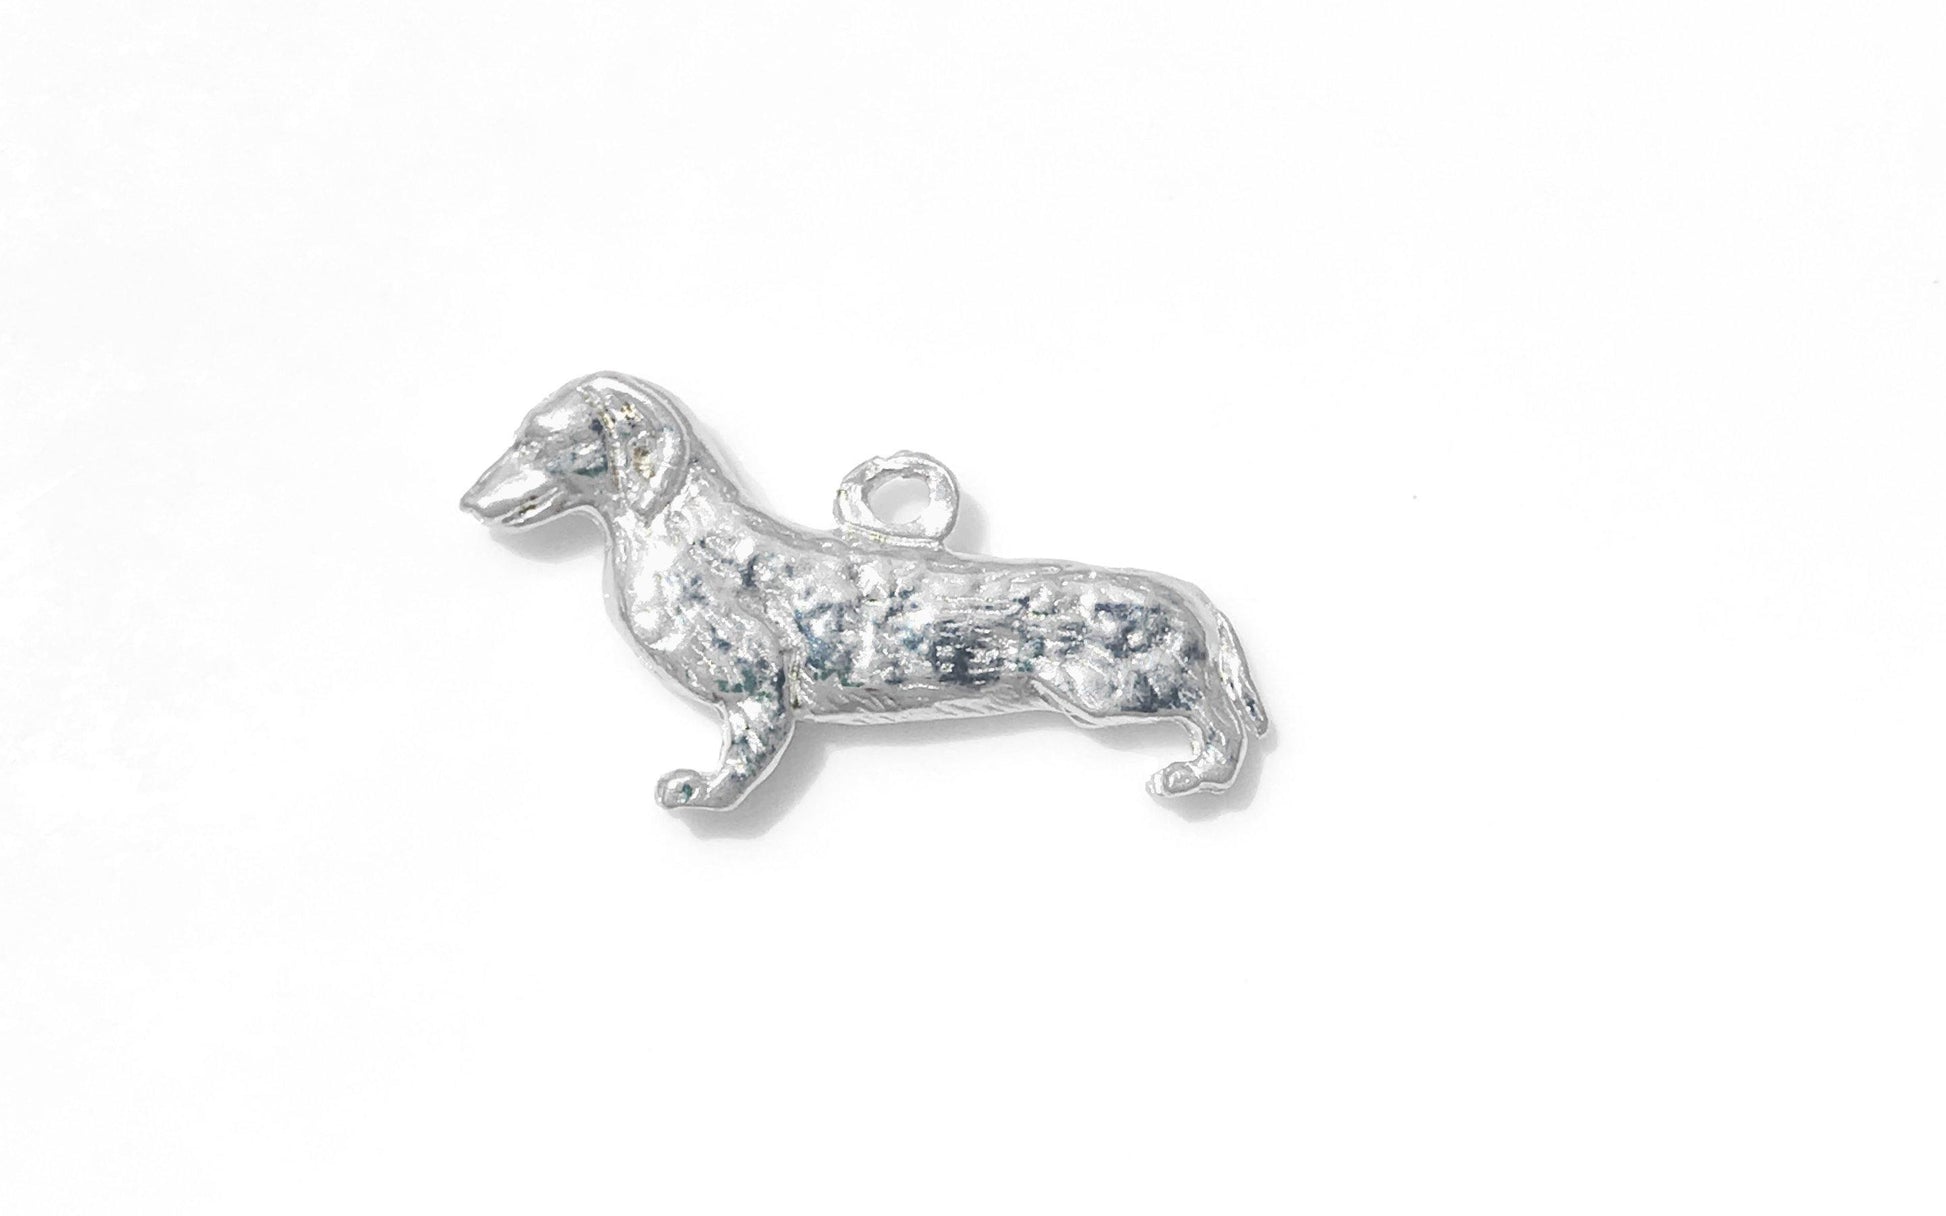 Handmade Pewter Dog Breed Charm Adjustable Necklace - Pet Memorial Jewelry for Daughter -Several Breeds Available - House of Morgan Pewter